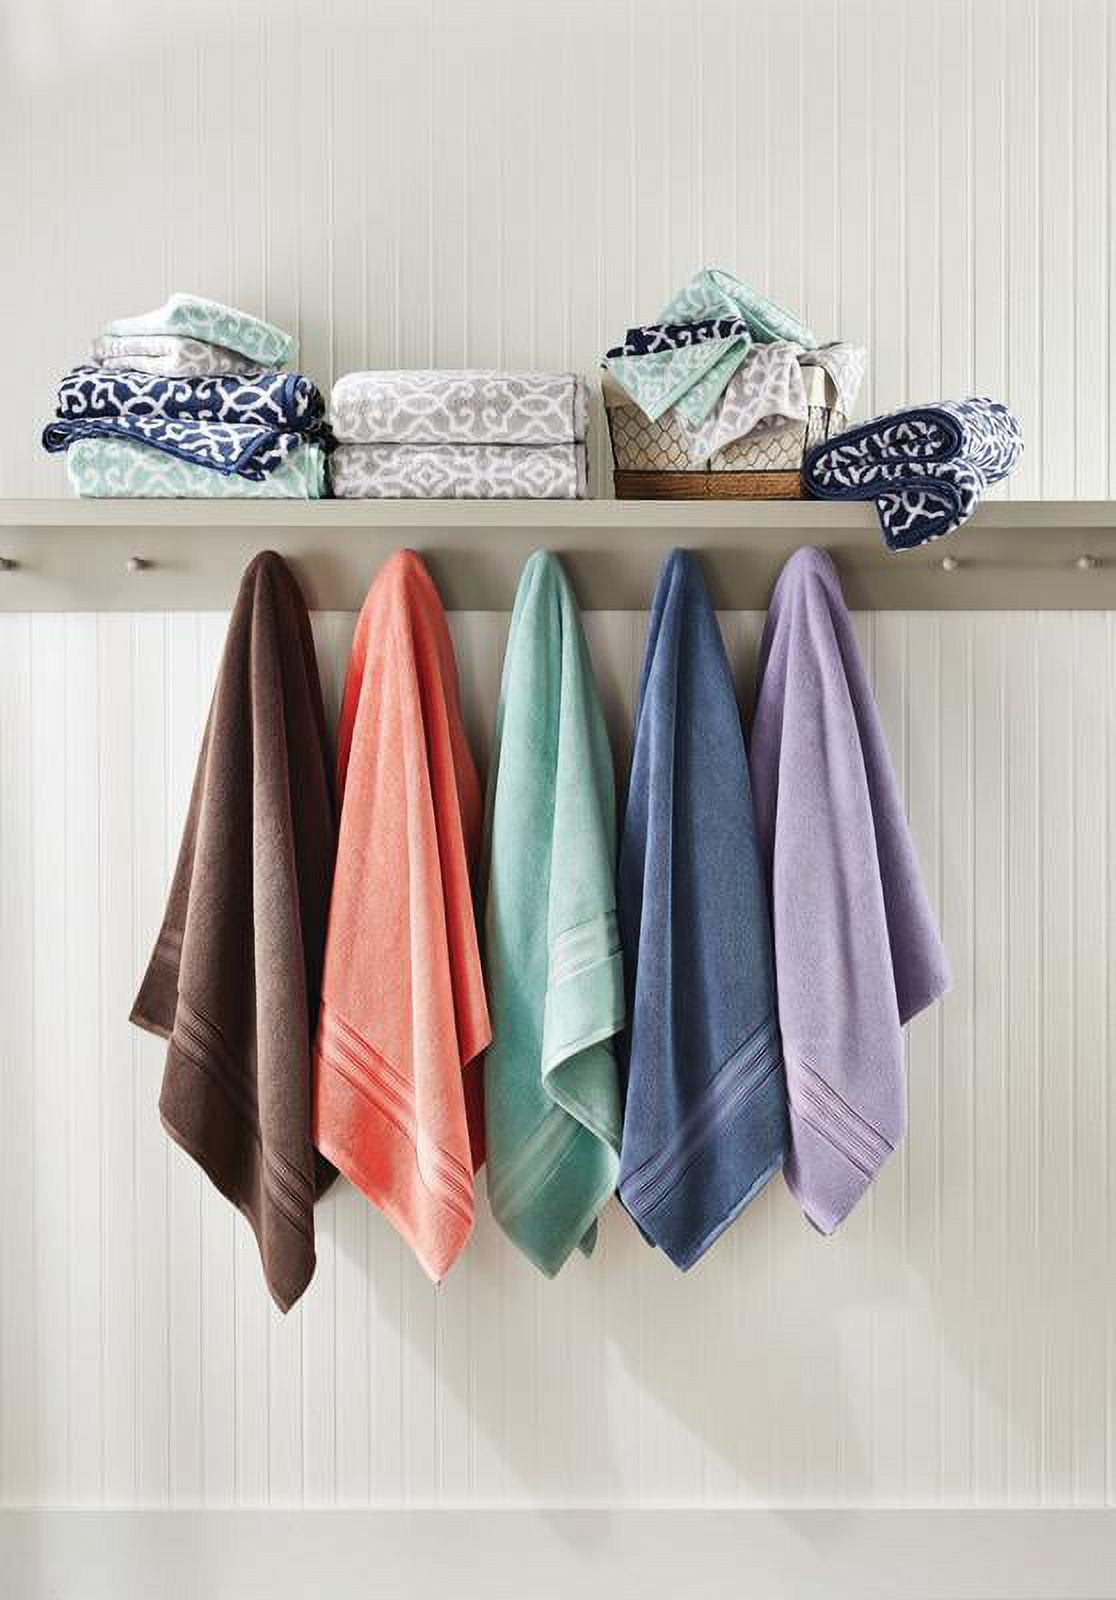 Insignia Blue 6PC Bath Towel Set, Better Homes & Gardens Thick and Plush Collection - image 5 of 5